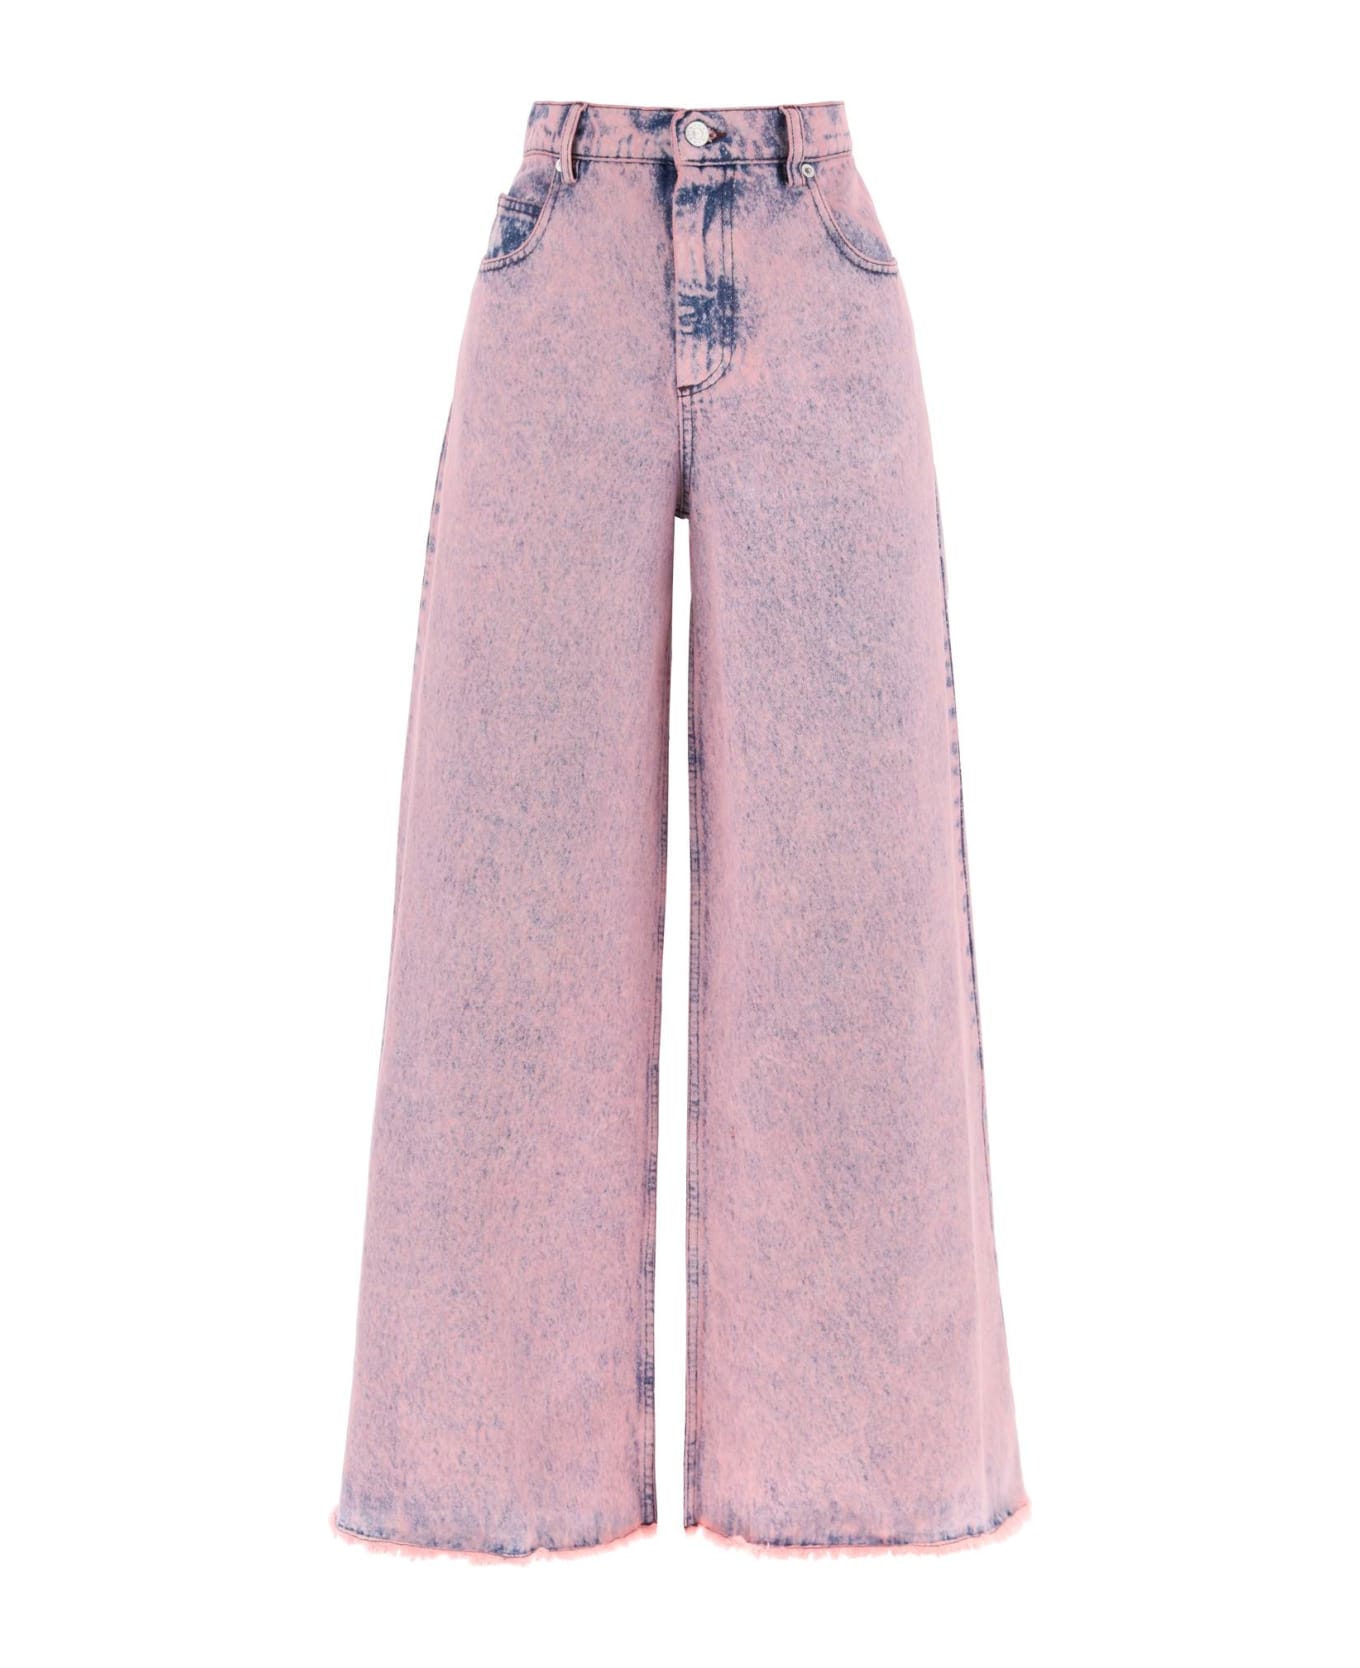 Marni Wide Leg Jeans In Overdyed Denim - Pink